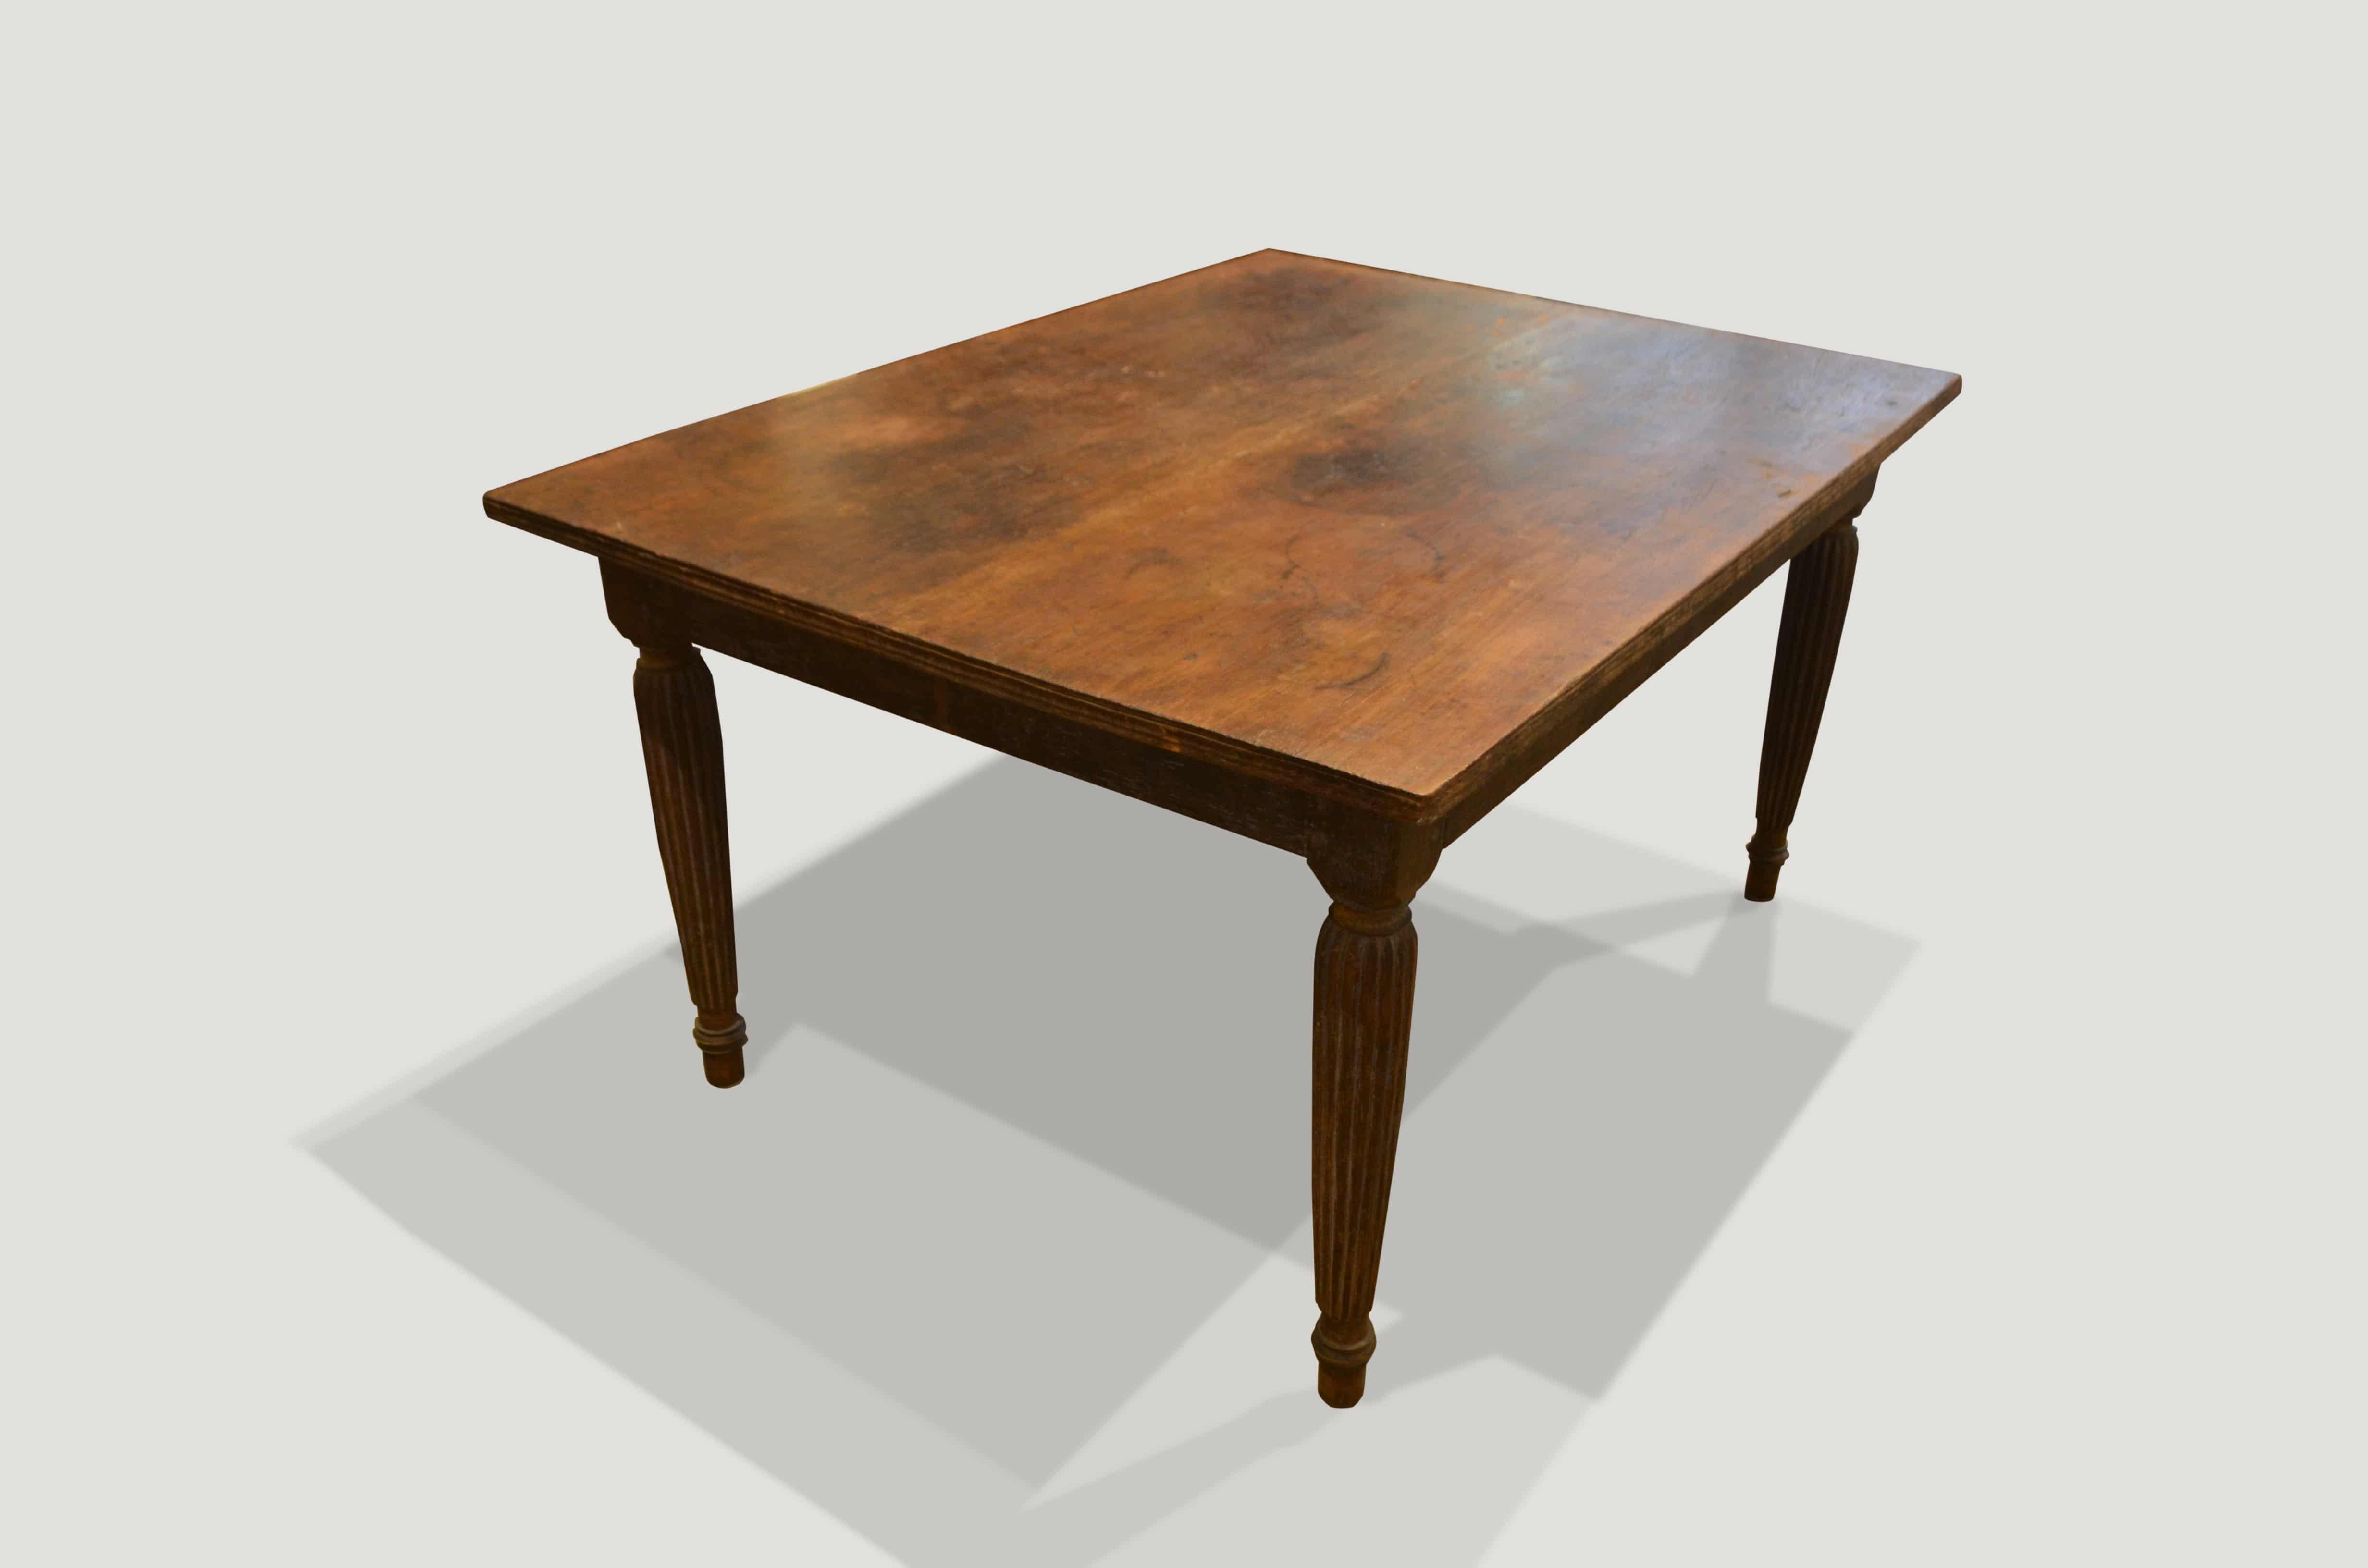 Andrianna Shamaris Raffles Influenced Teak Wood Dining Table In Excellent Condition For Sale In New York, NY